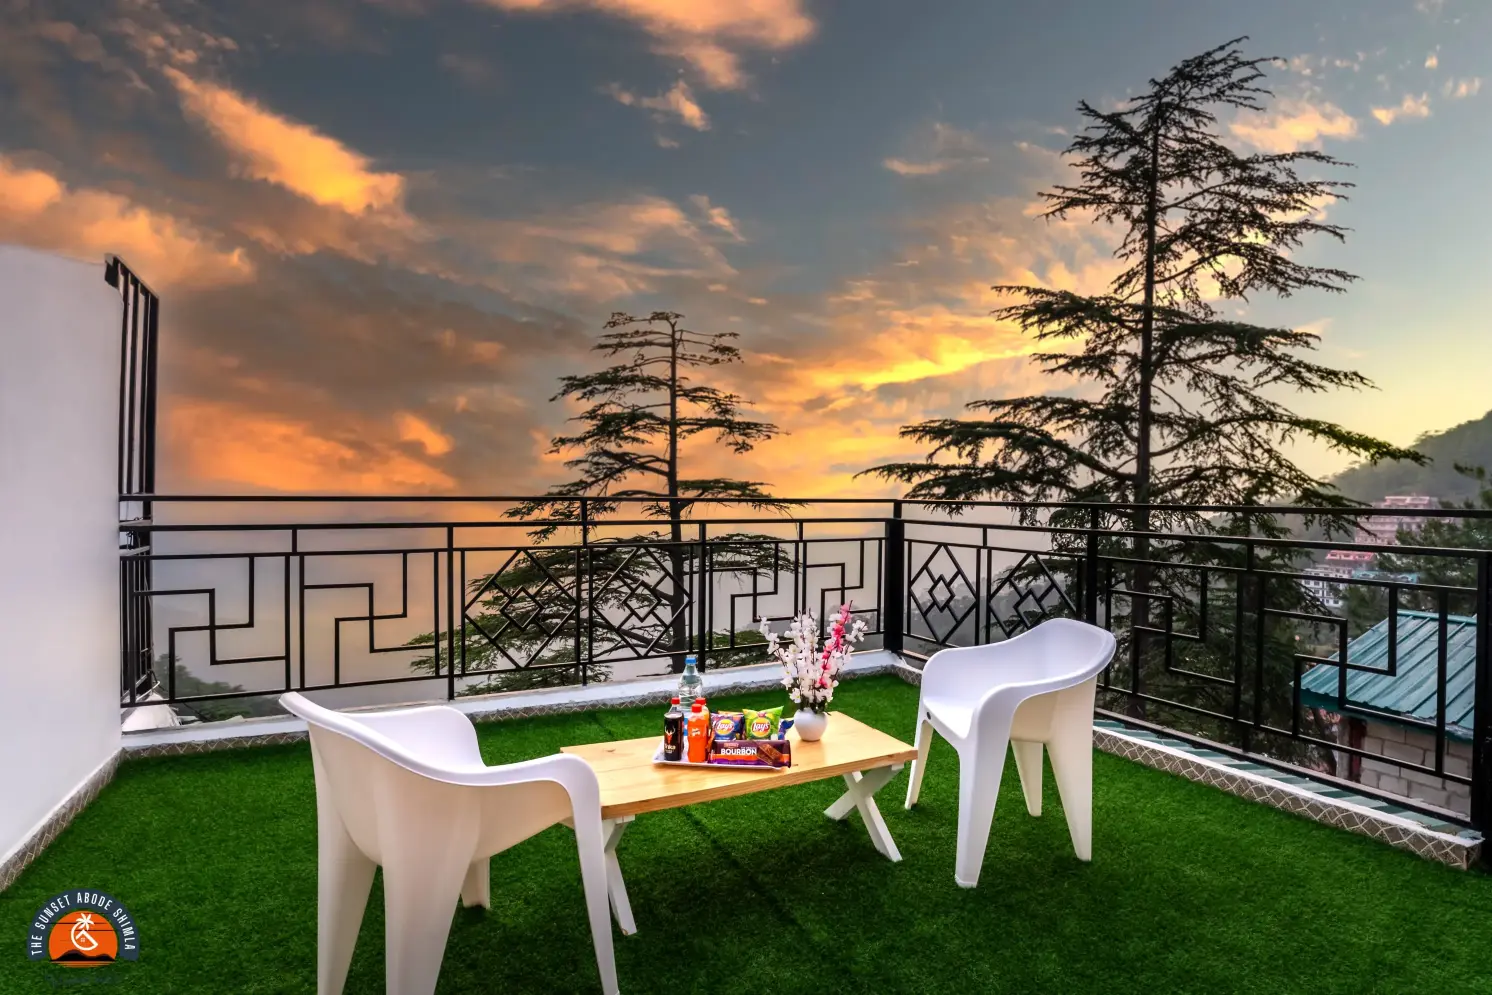 THE SUNSET ABODE SHIMLA 4 BEDROOM WITH VALLEY VIEWS